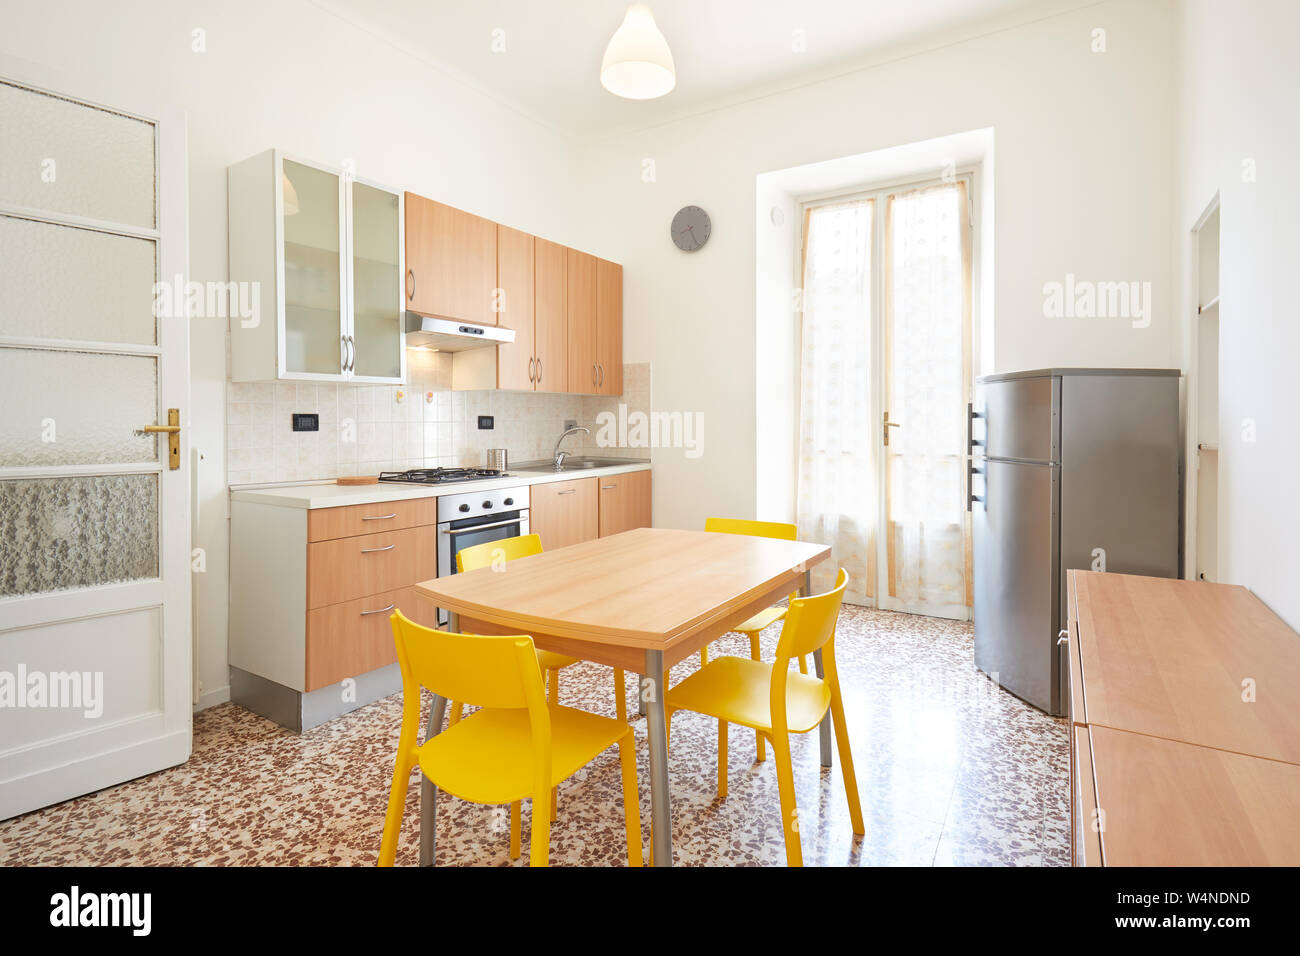 Kitchen interior in renovated, spacious apartment for rent Stock Photo